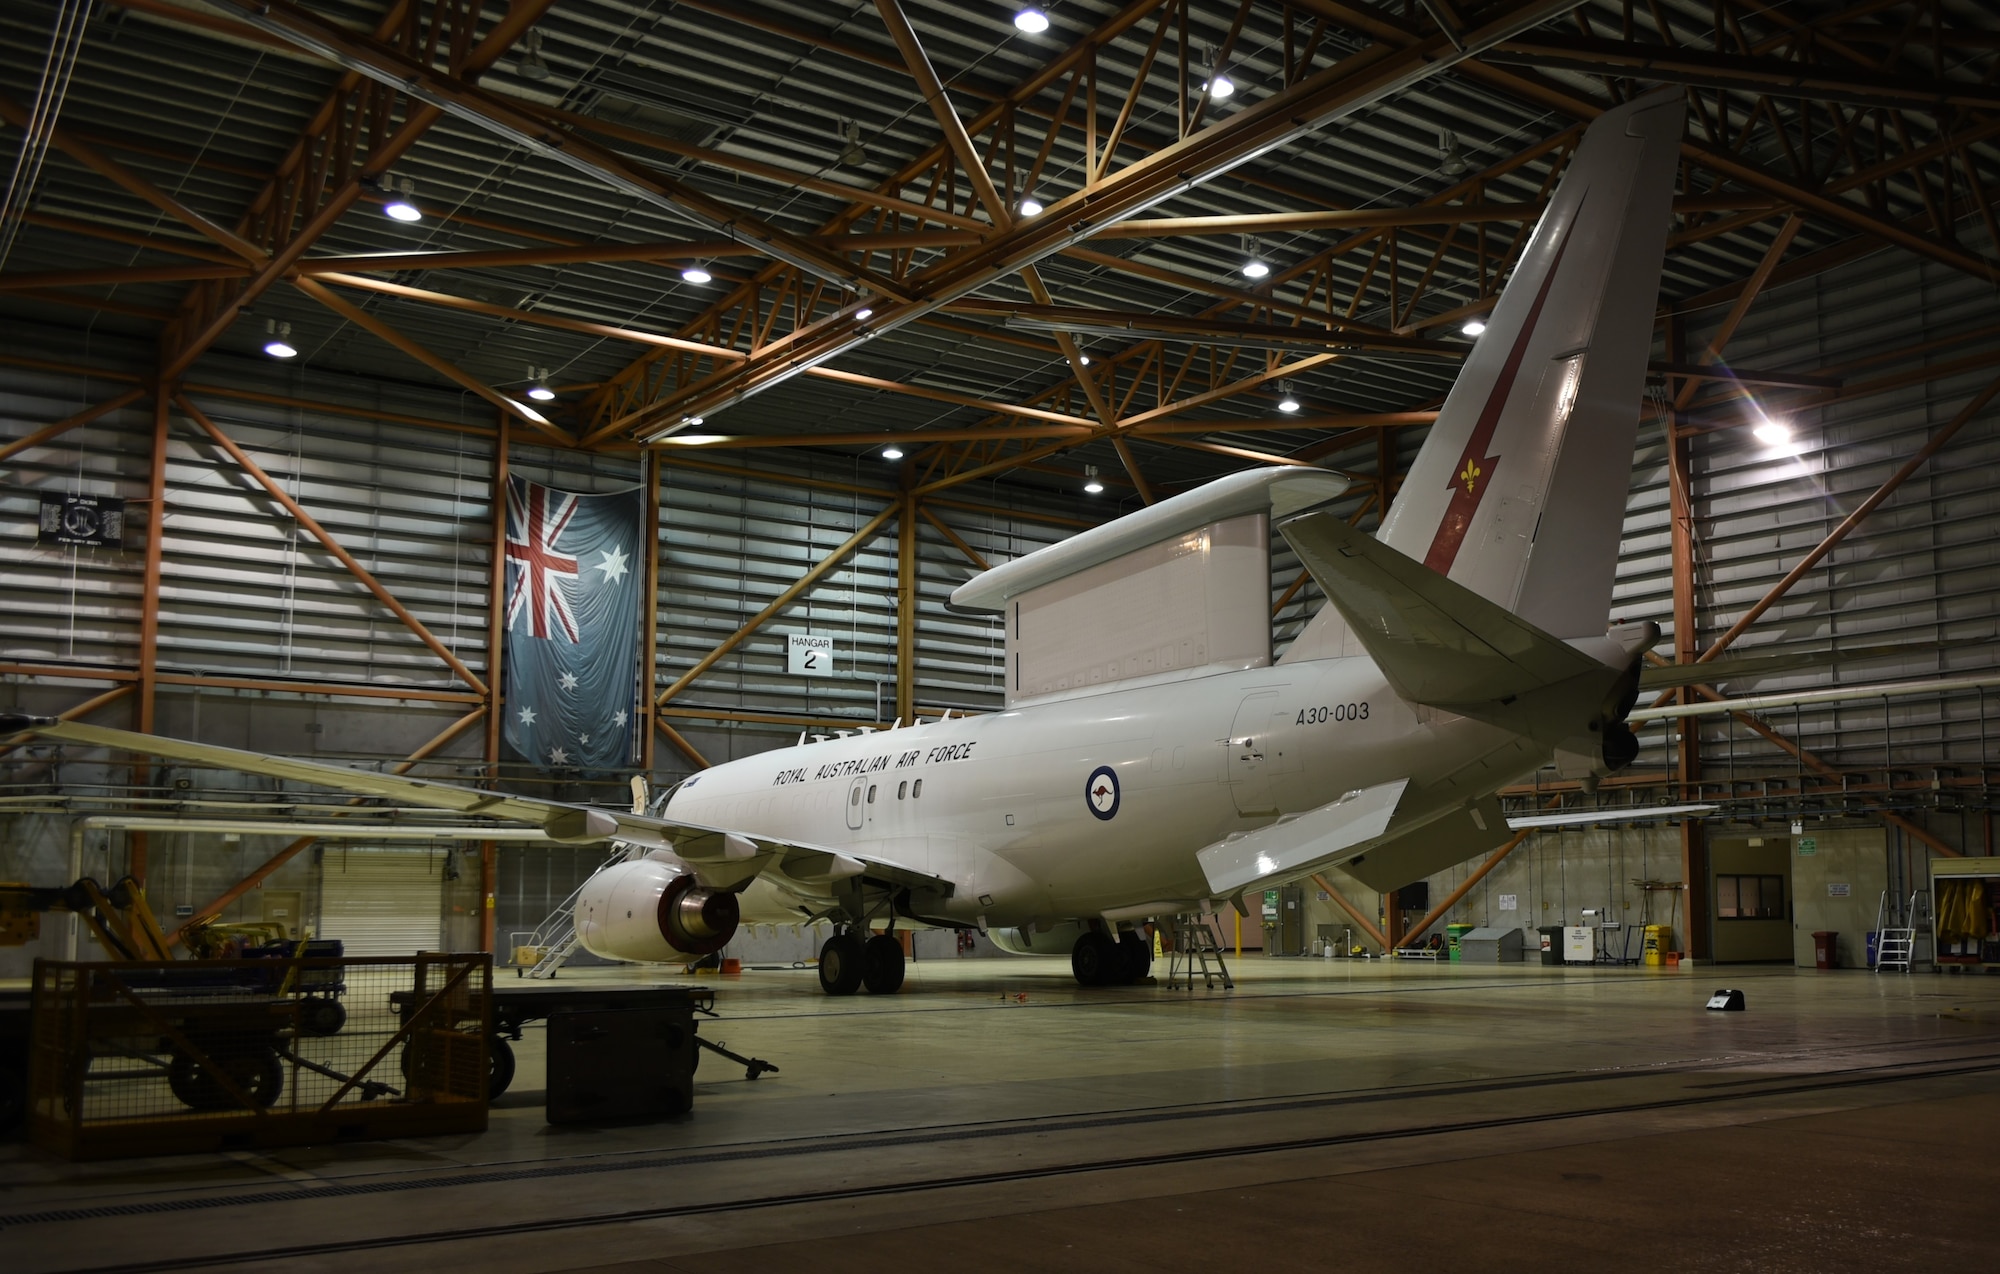 An E-3G Airborne Warning and Control System aircraft of the 552nd Air Control Wing, 960th Airborne Air Control Squadron, joins the Royal Australian Air Force E-7A Airborne Early Warning and Control aircraft in September 2019, Williamtown, Australia. The AWACS joined the RAAF to work on mission integration and partnership of similar airframes in response to the E-7A AEWC visiting the 552nd ACW in 2017. (U.S. Air Force photo/2d Lt Ashlyn K. Paulson)